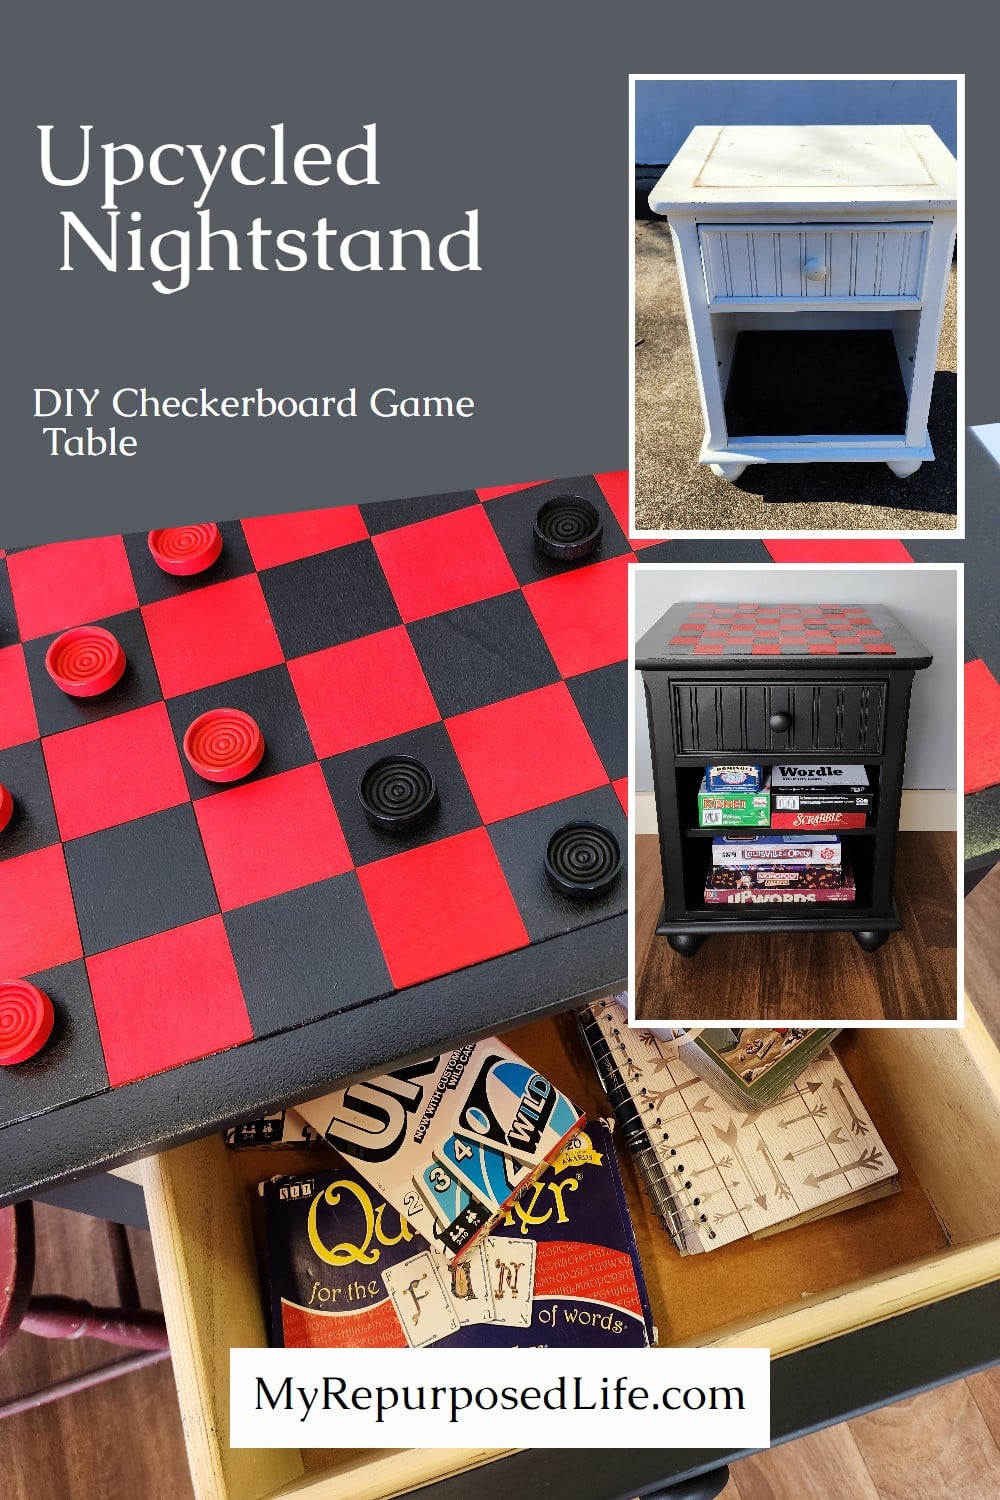 How to transform an old nightstand into a checkerboard game table. With a shelf and a drawer the storage is plentiful for storing games, checkers and more. #MyRepurposedLife #gametable #diy via @repurposedlife